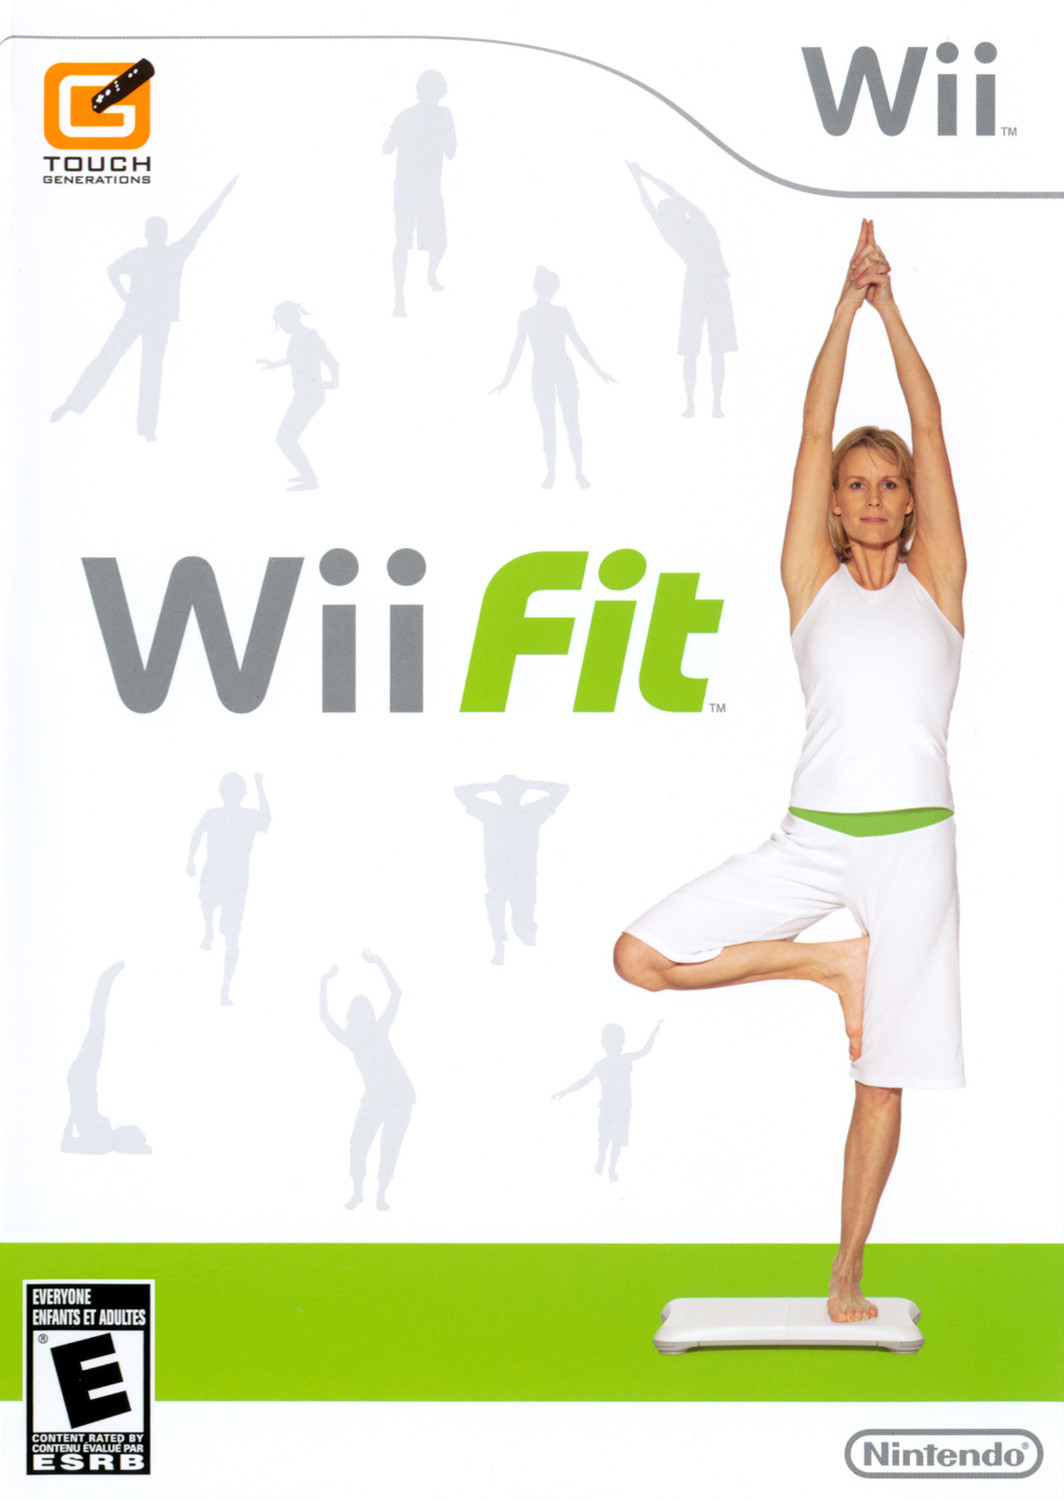 https://wiki.dolphin-emu.org/images/0/0e/Wii_Fit.jpg